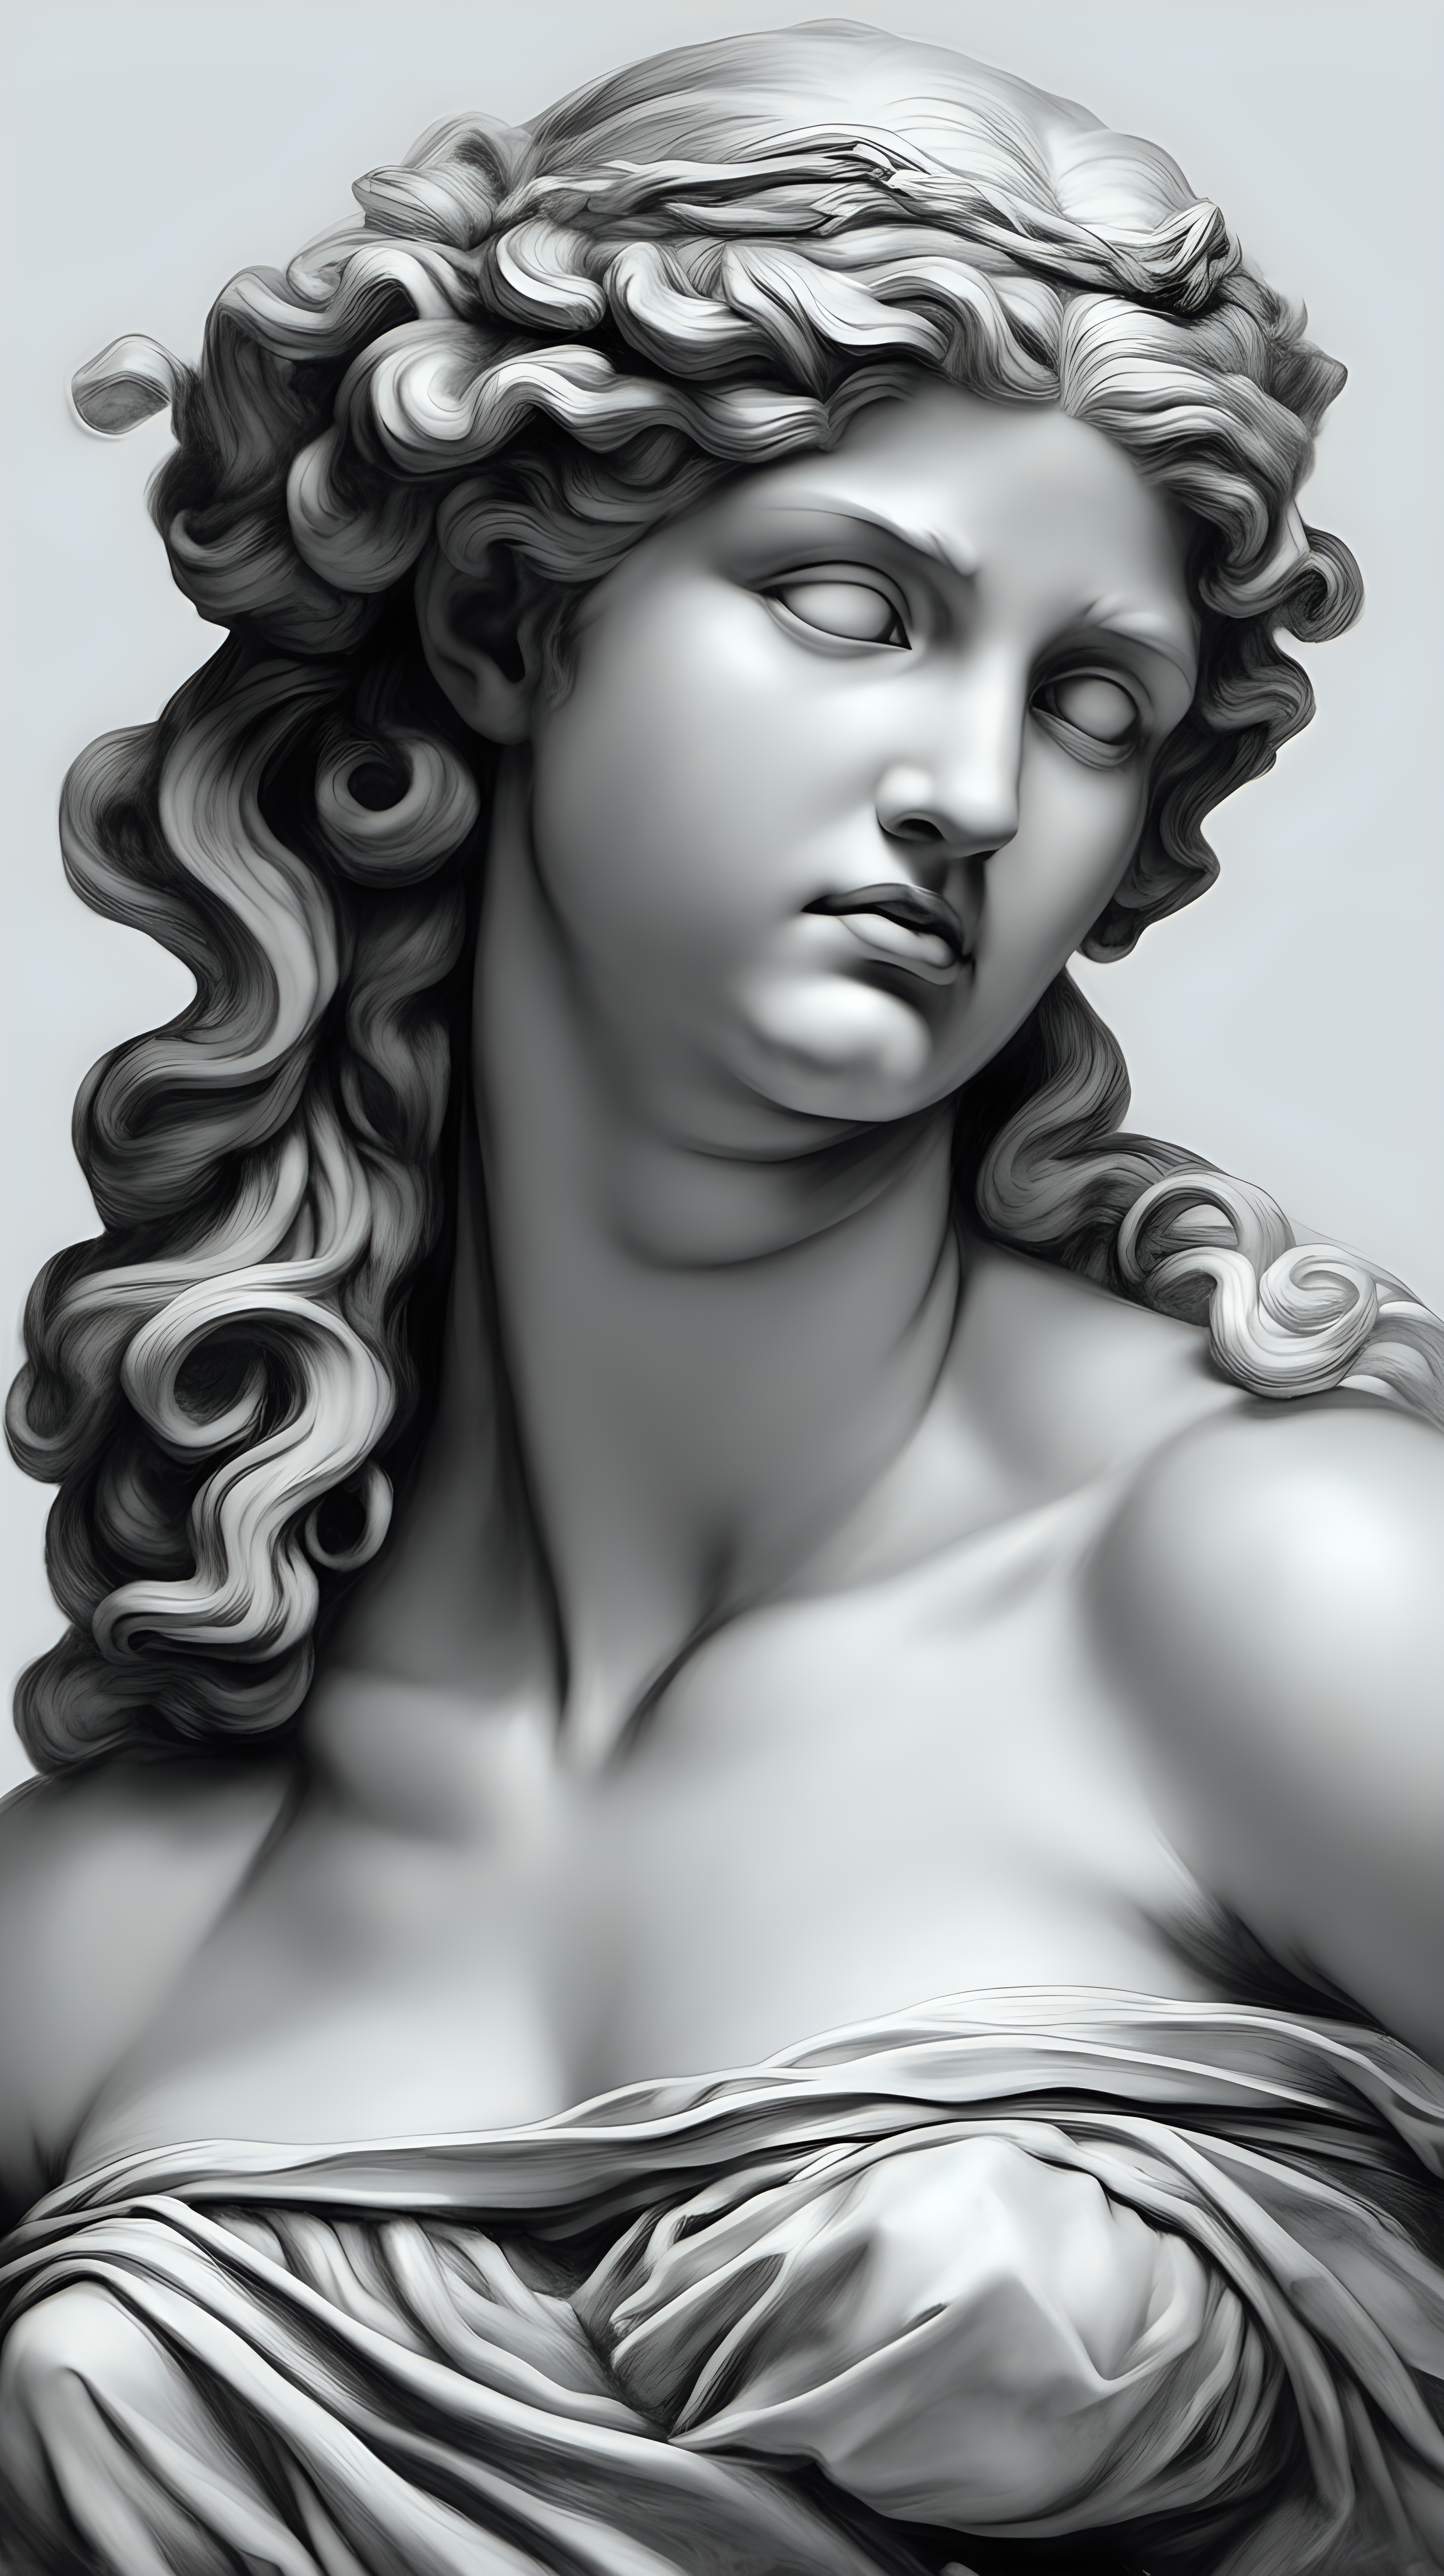 /imagine prompt : a hyper realistic black and gray Michelangelo drawing, feauteted a beautiful aphrodite, godess greek mytology
/describe : whole subjects in the box
-no cut
<background>white papaer
<style>pencil drawing
_ar 9:16